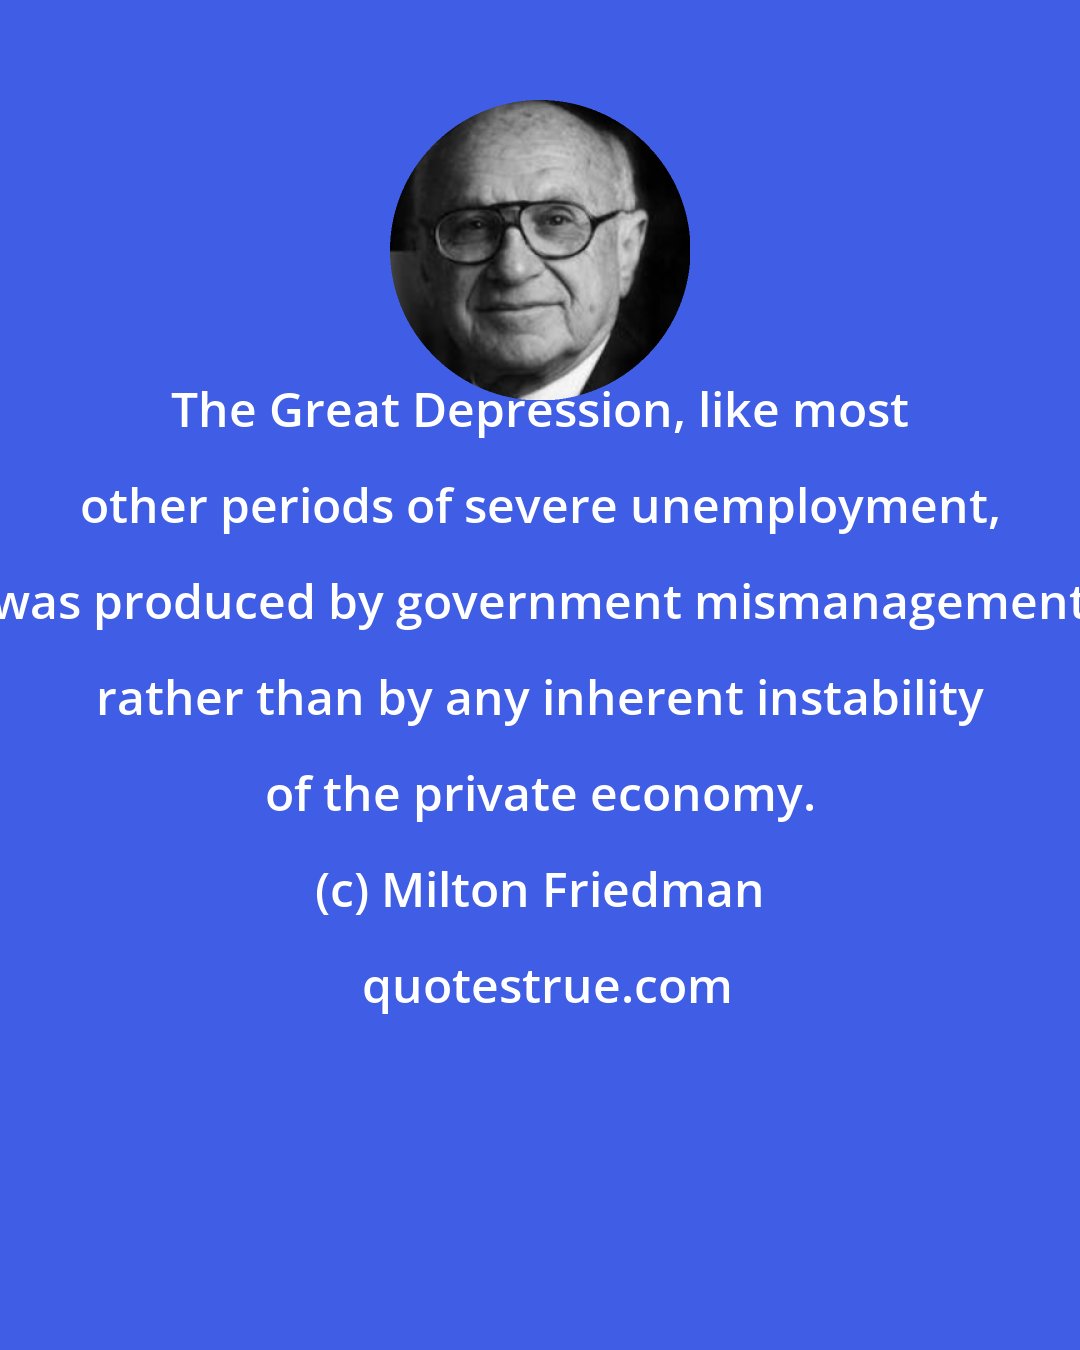 Milton Friedman: The Great Depression, like most other periods of severe unemployment, was produced by government mismanagement rather than by any inherent instability of the private economy.